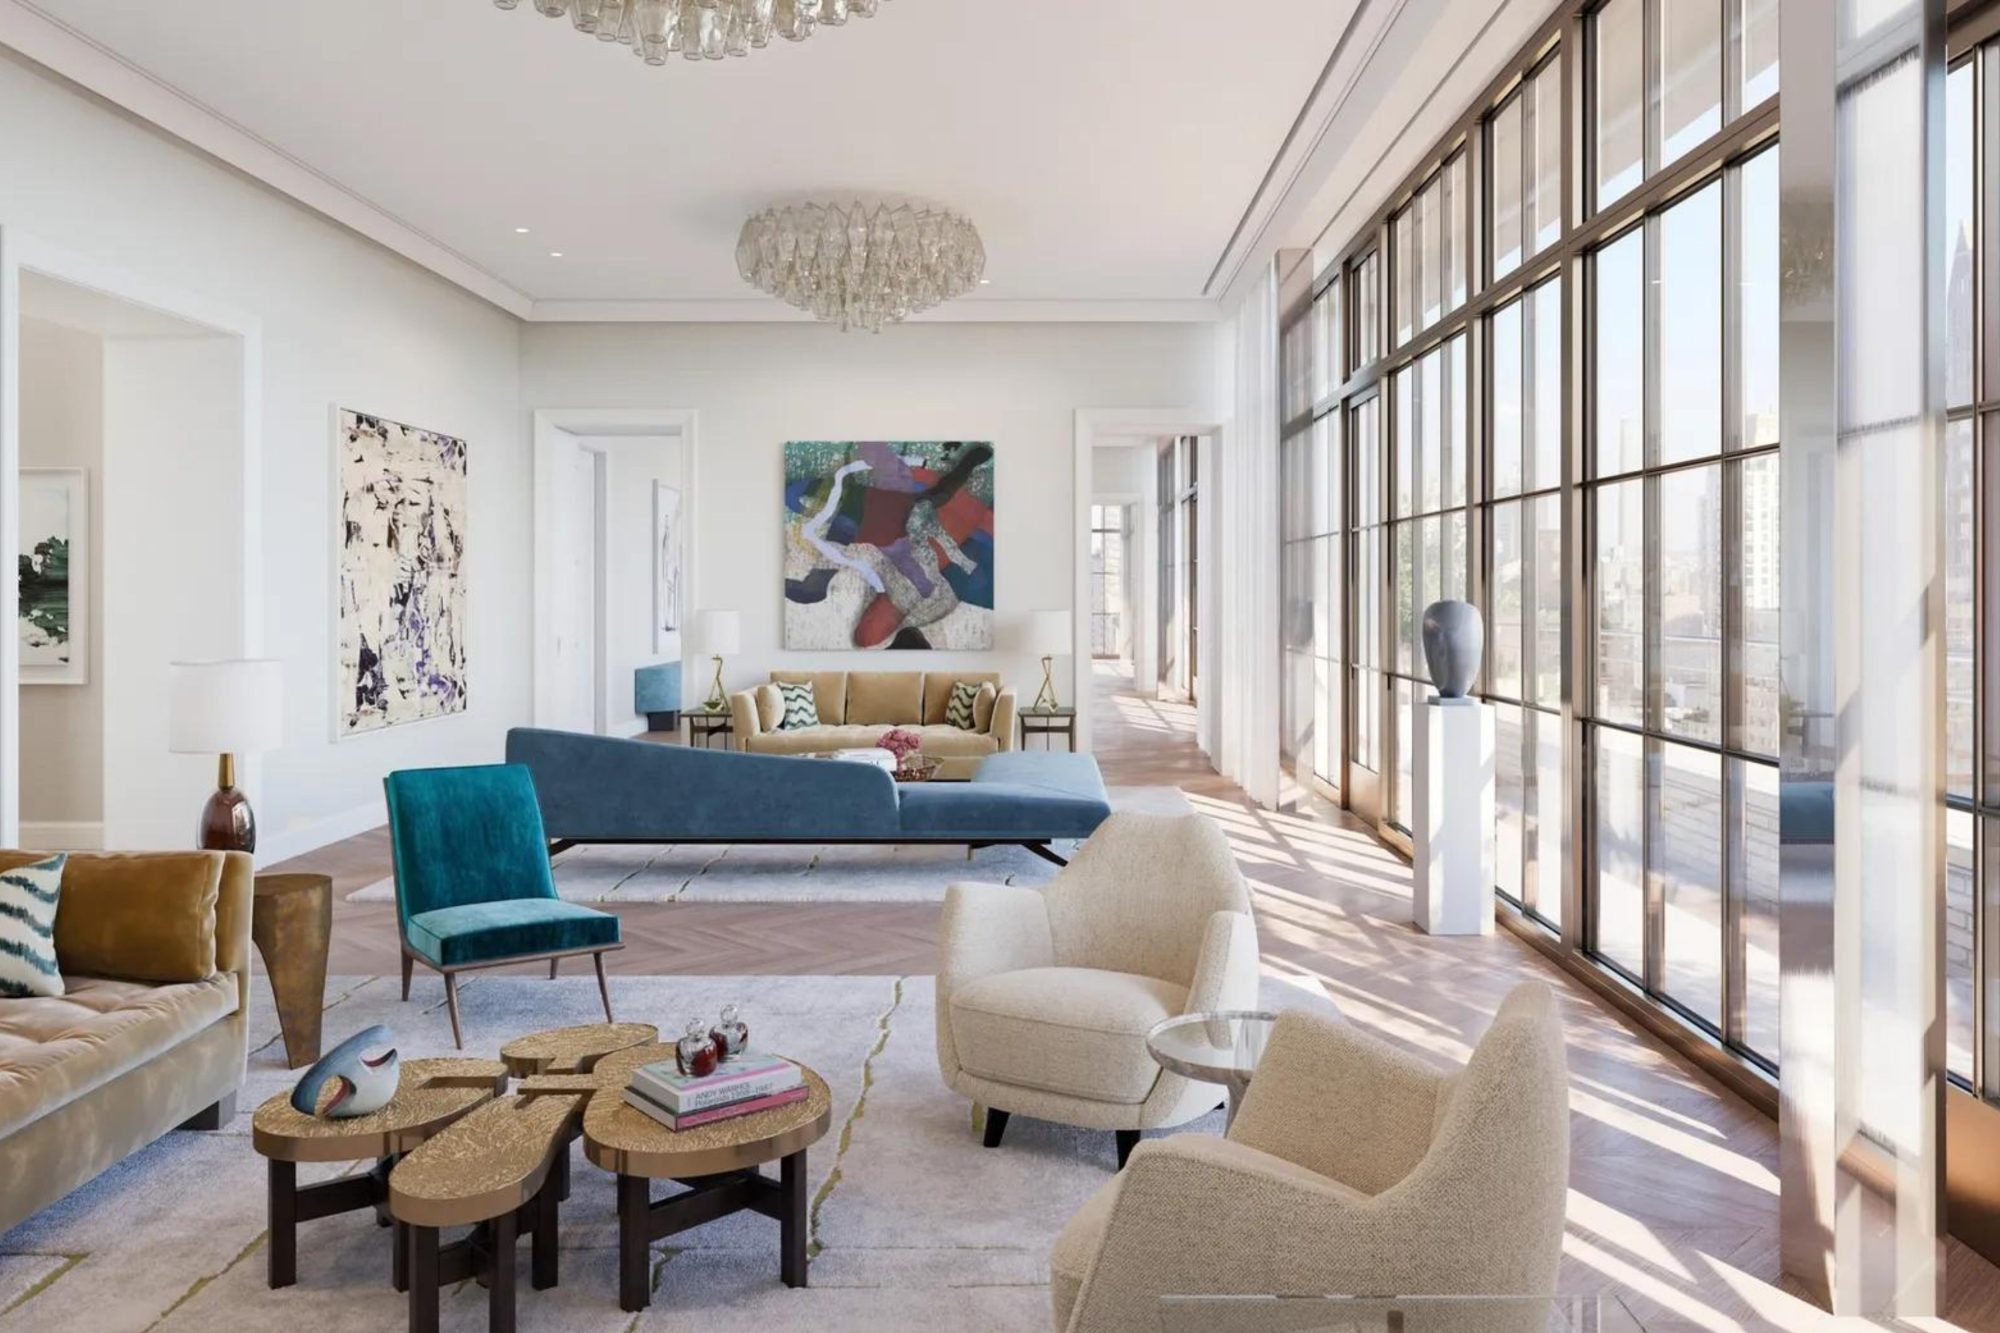 109 East 79 brings its unique elegance to the Upper East Side